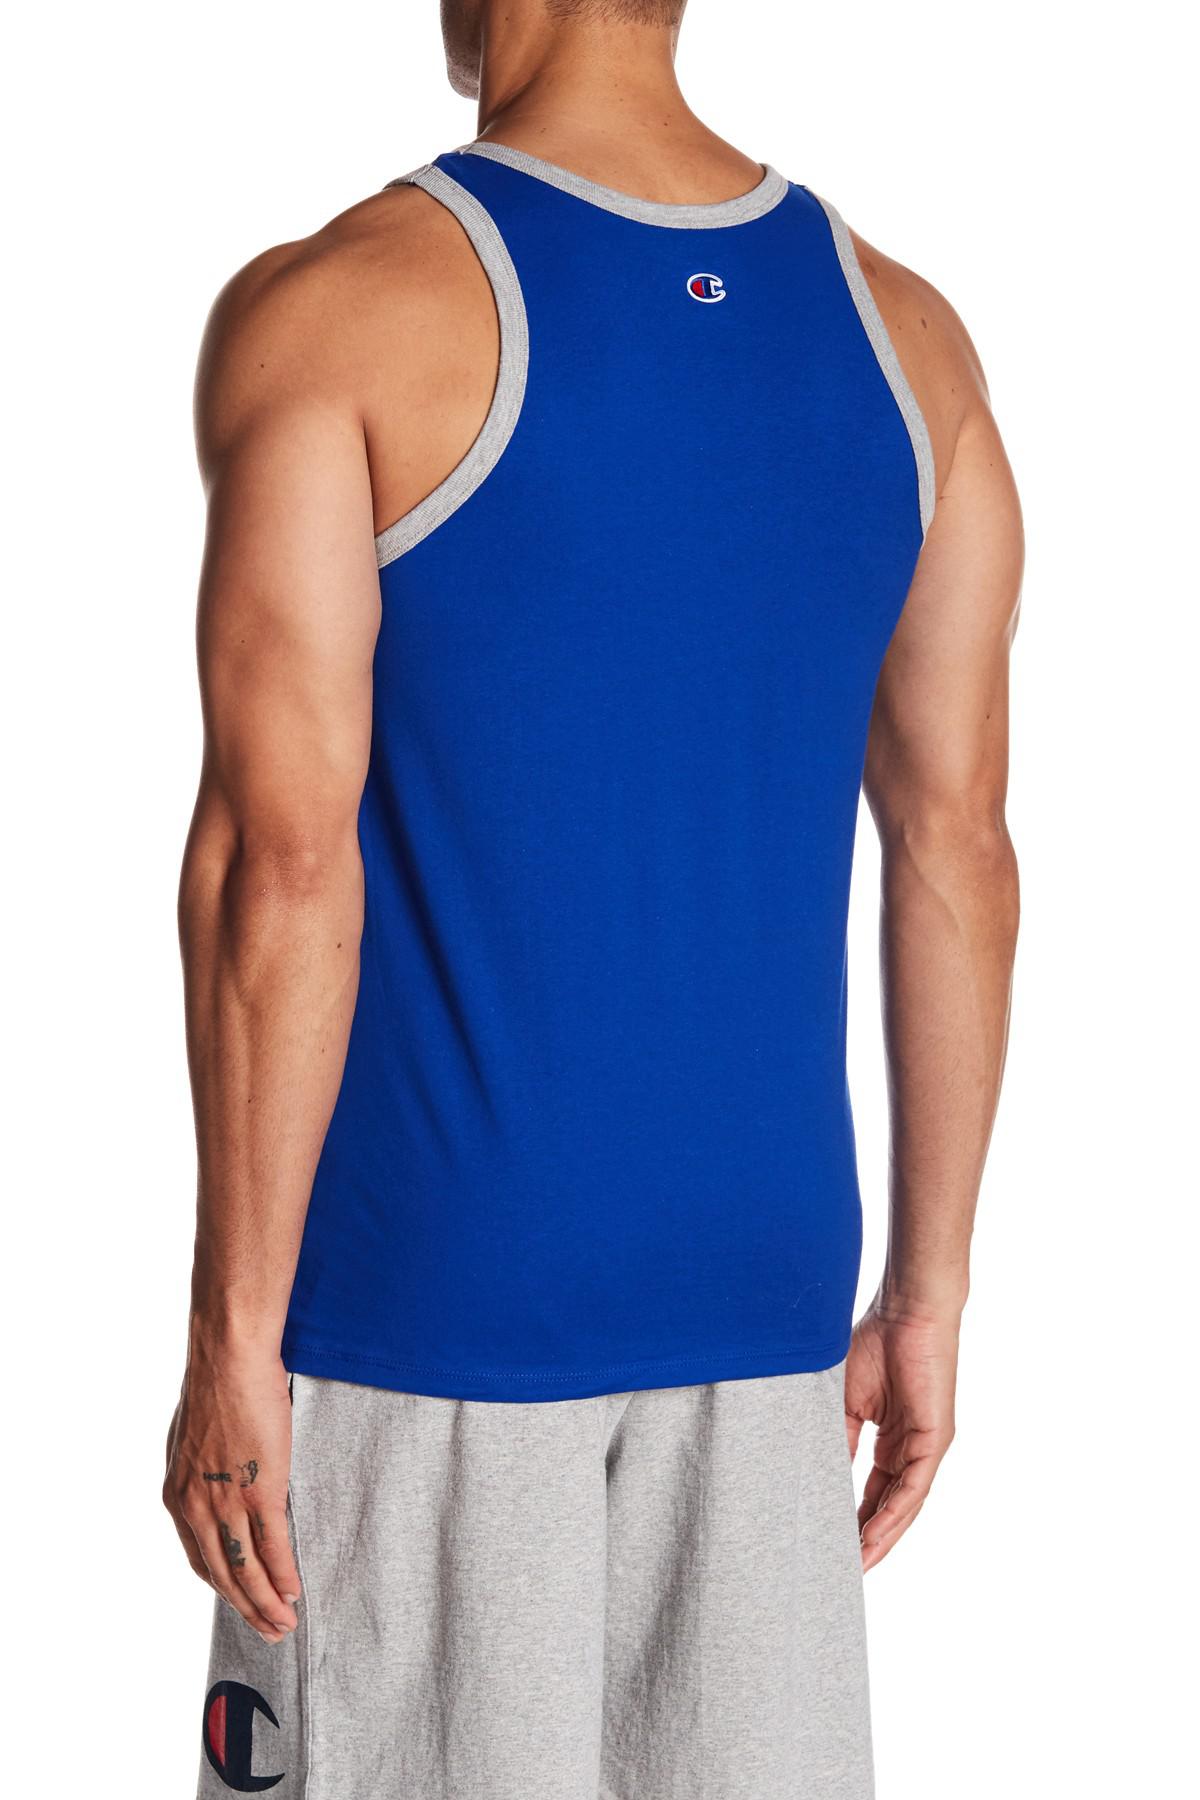 Champion Cotton Classic Jersey Ringer Tank Top in Blue for Men - Lyst